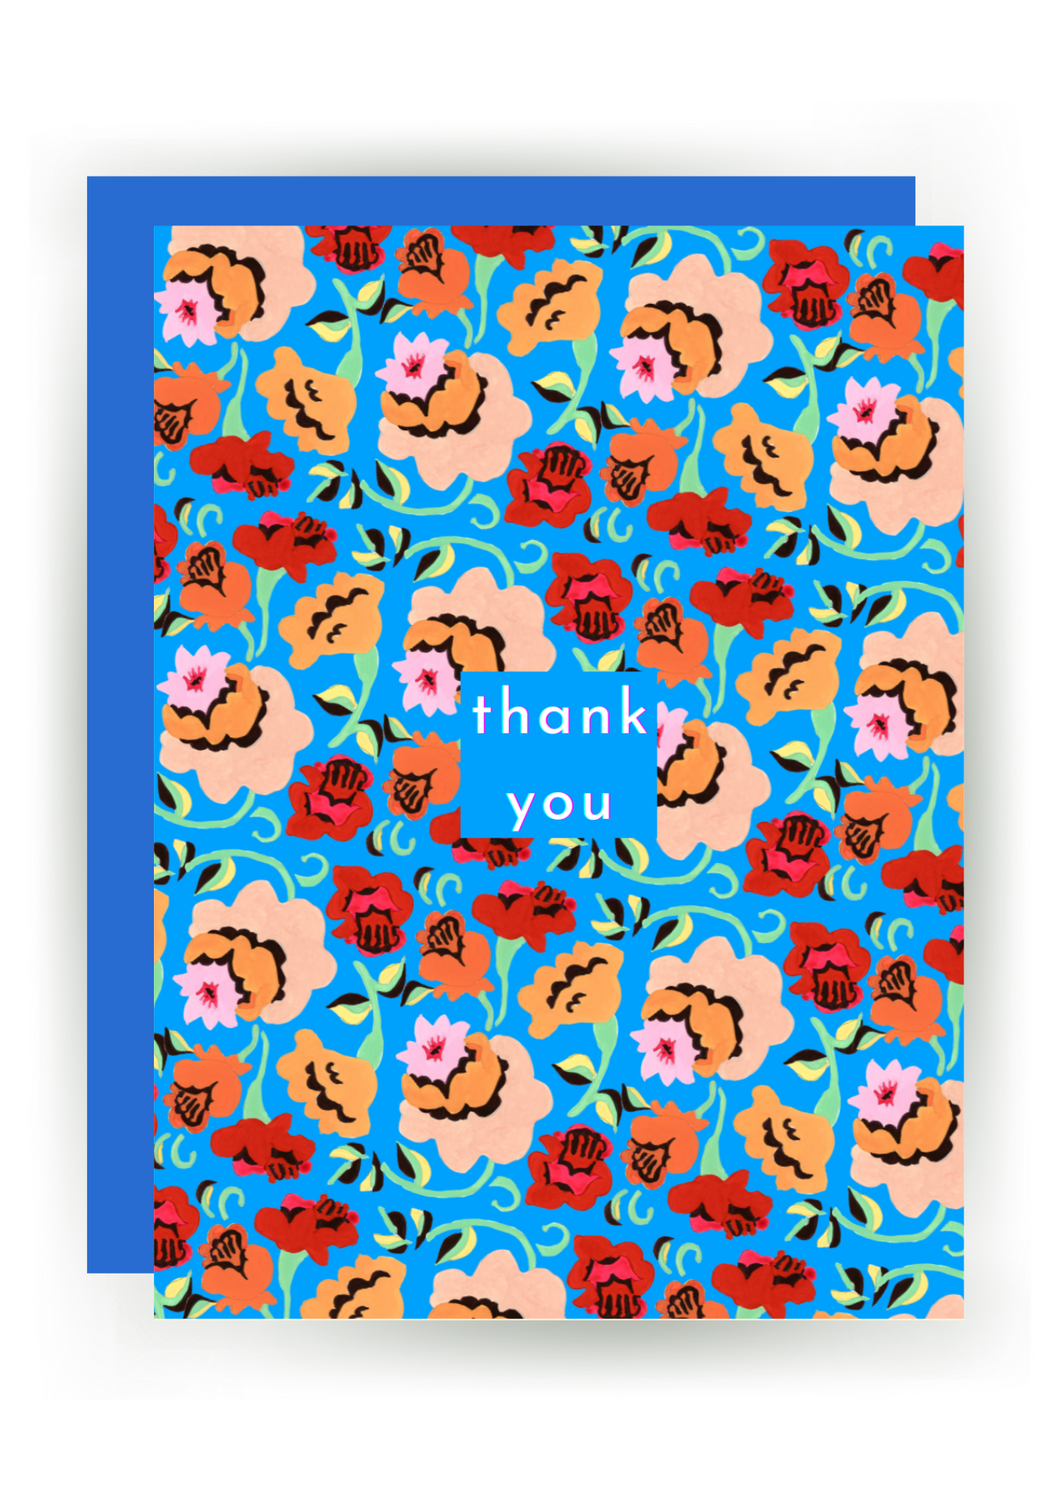 NF OC 33 /  'Thank You' Greeting Card